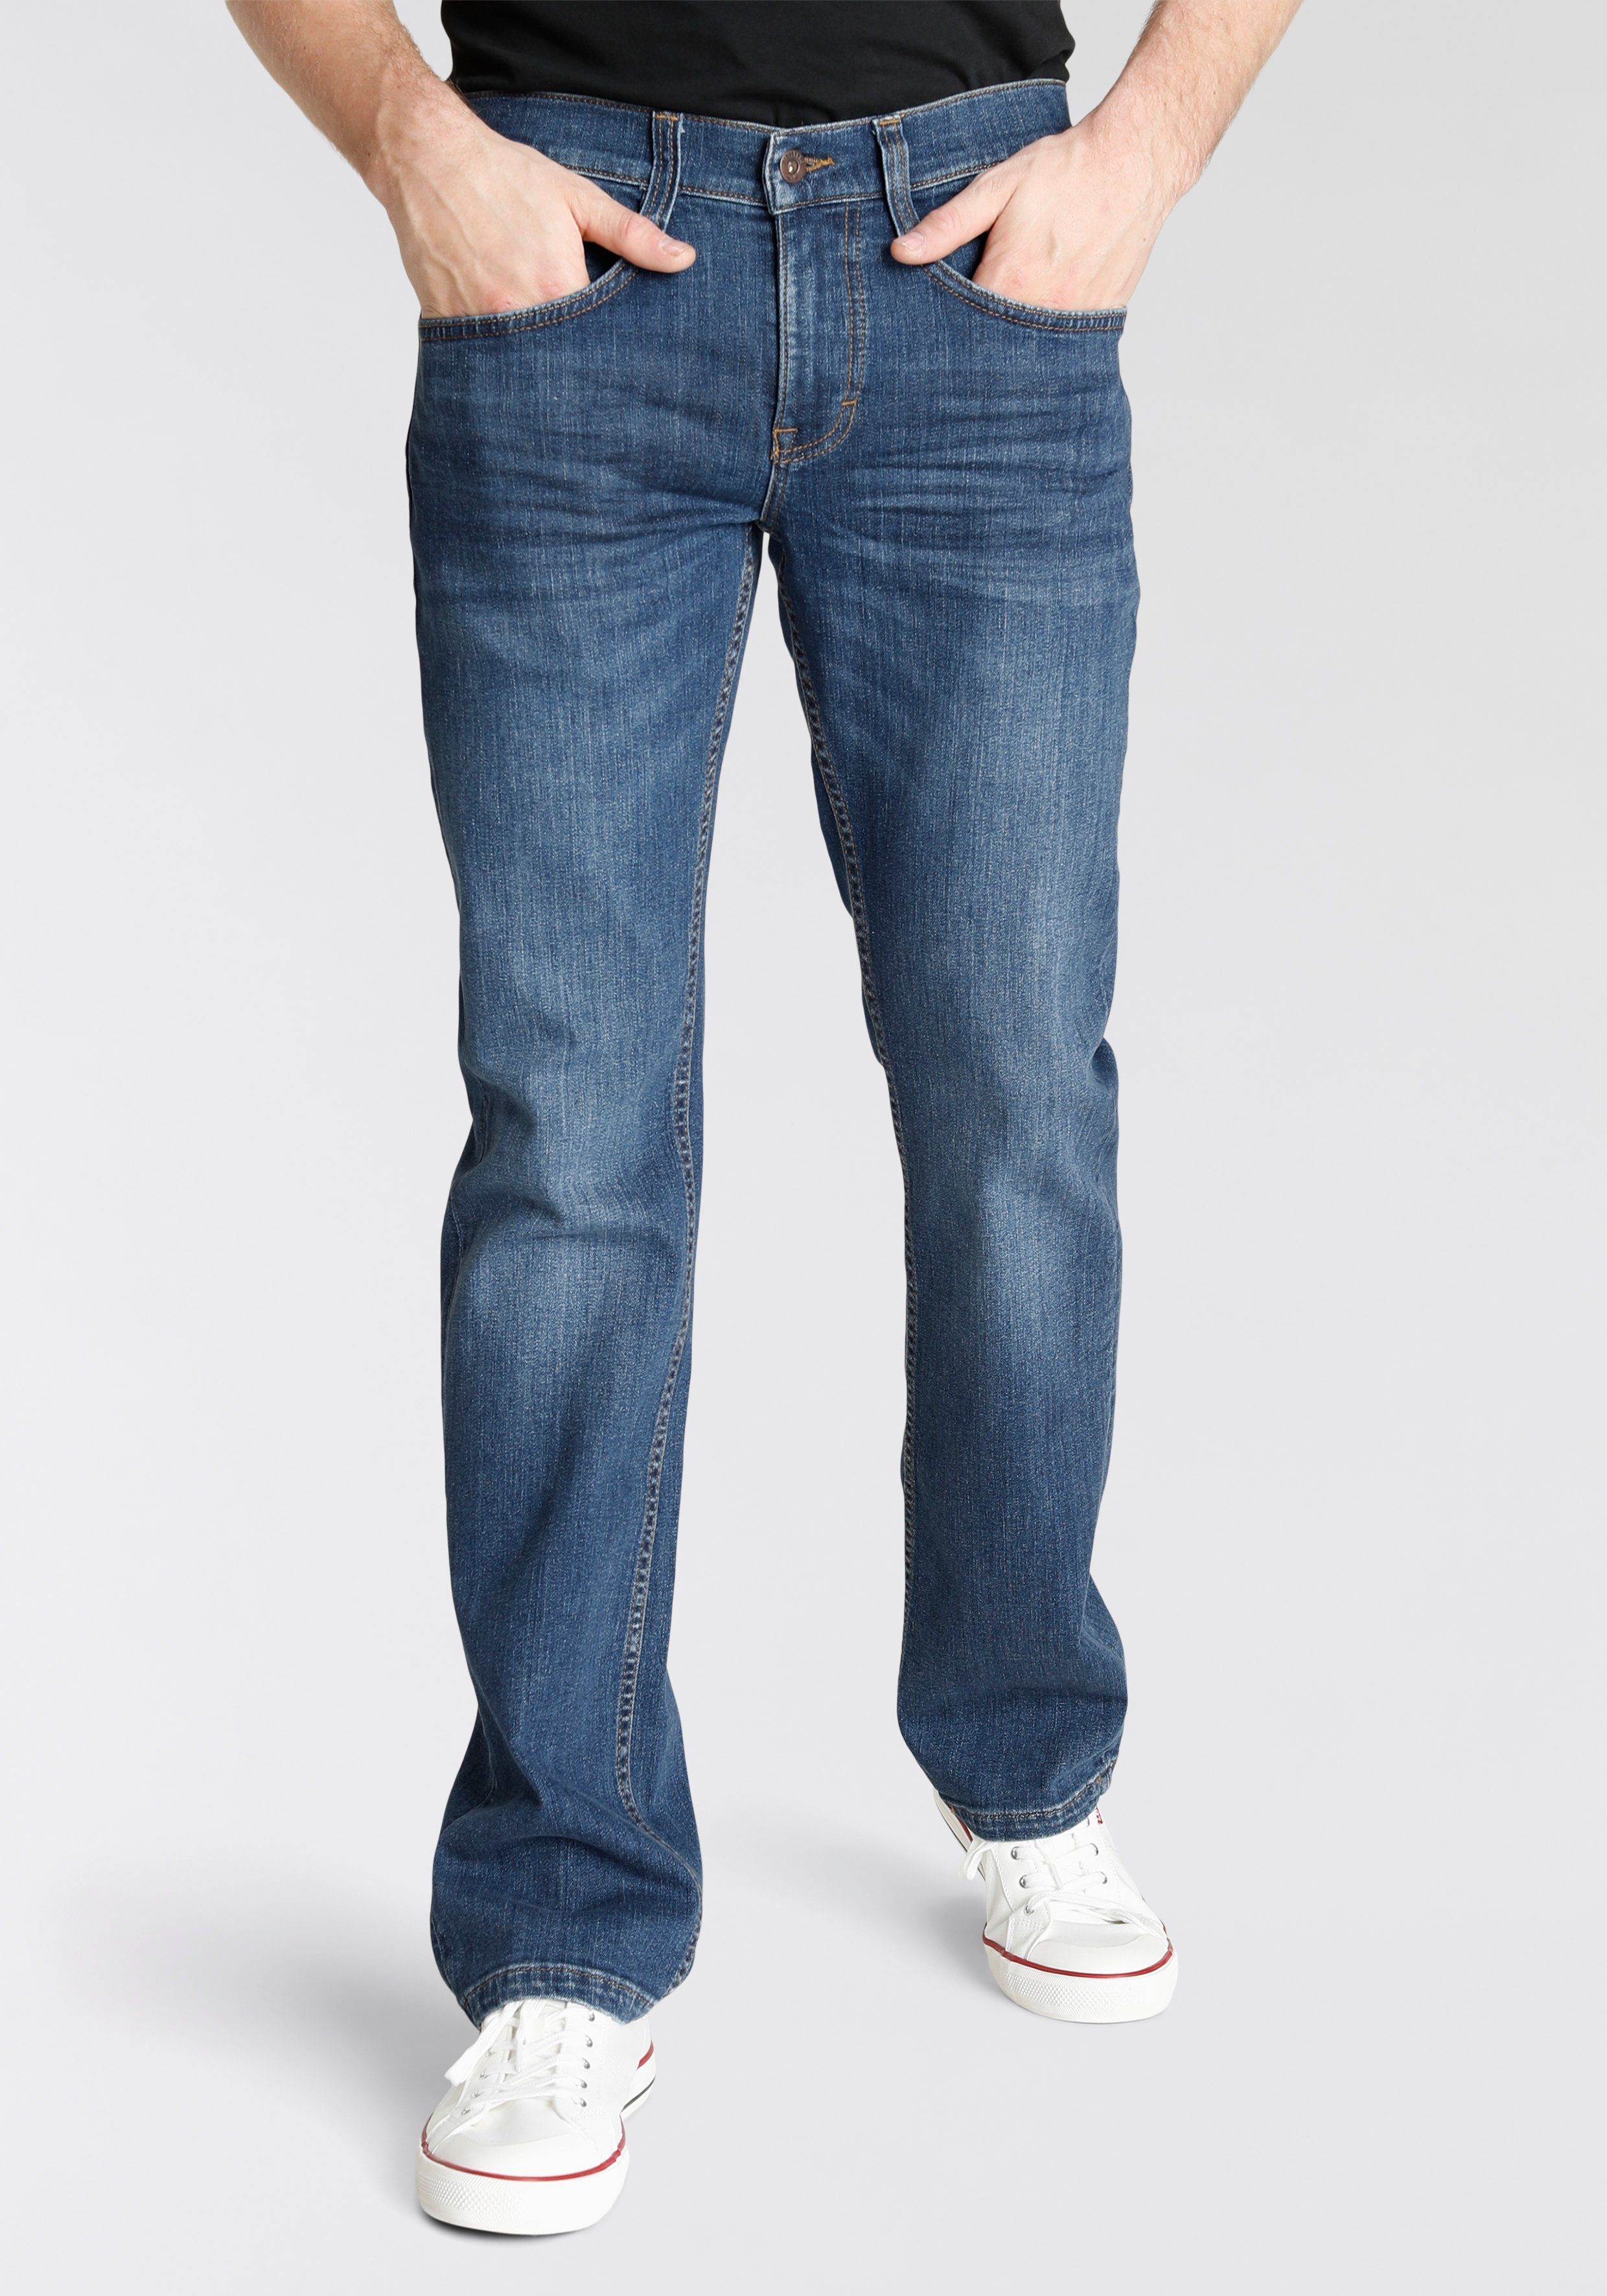 MUSTANG Bootcut-Jeans STYLE OREGON BOOTCUT dark blue wash | Bootcut Jeans